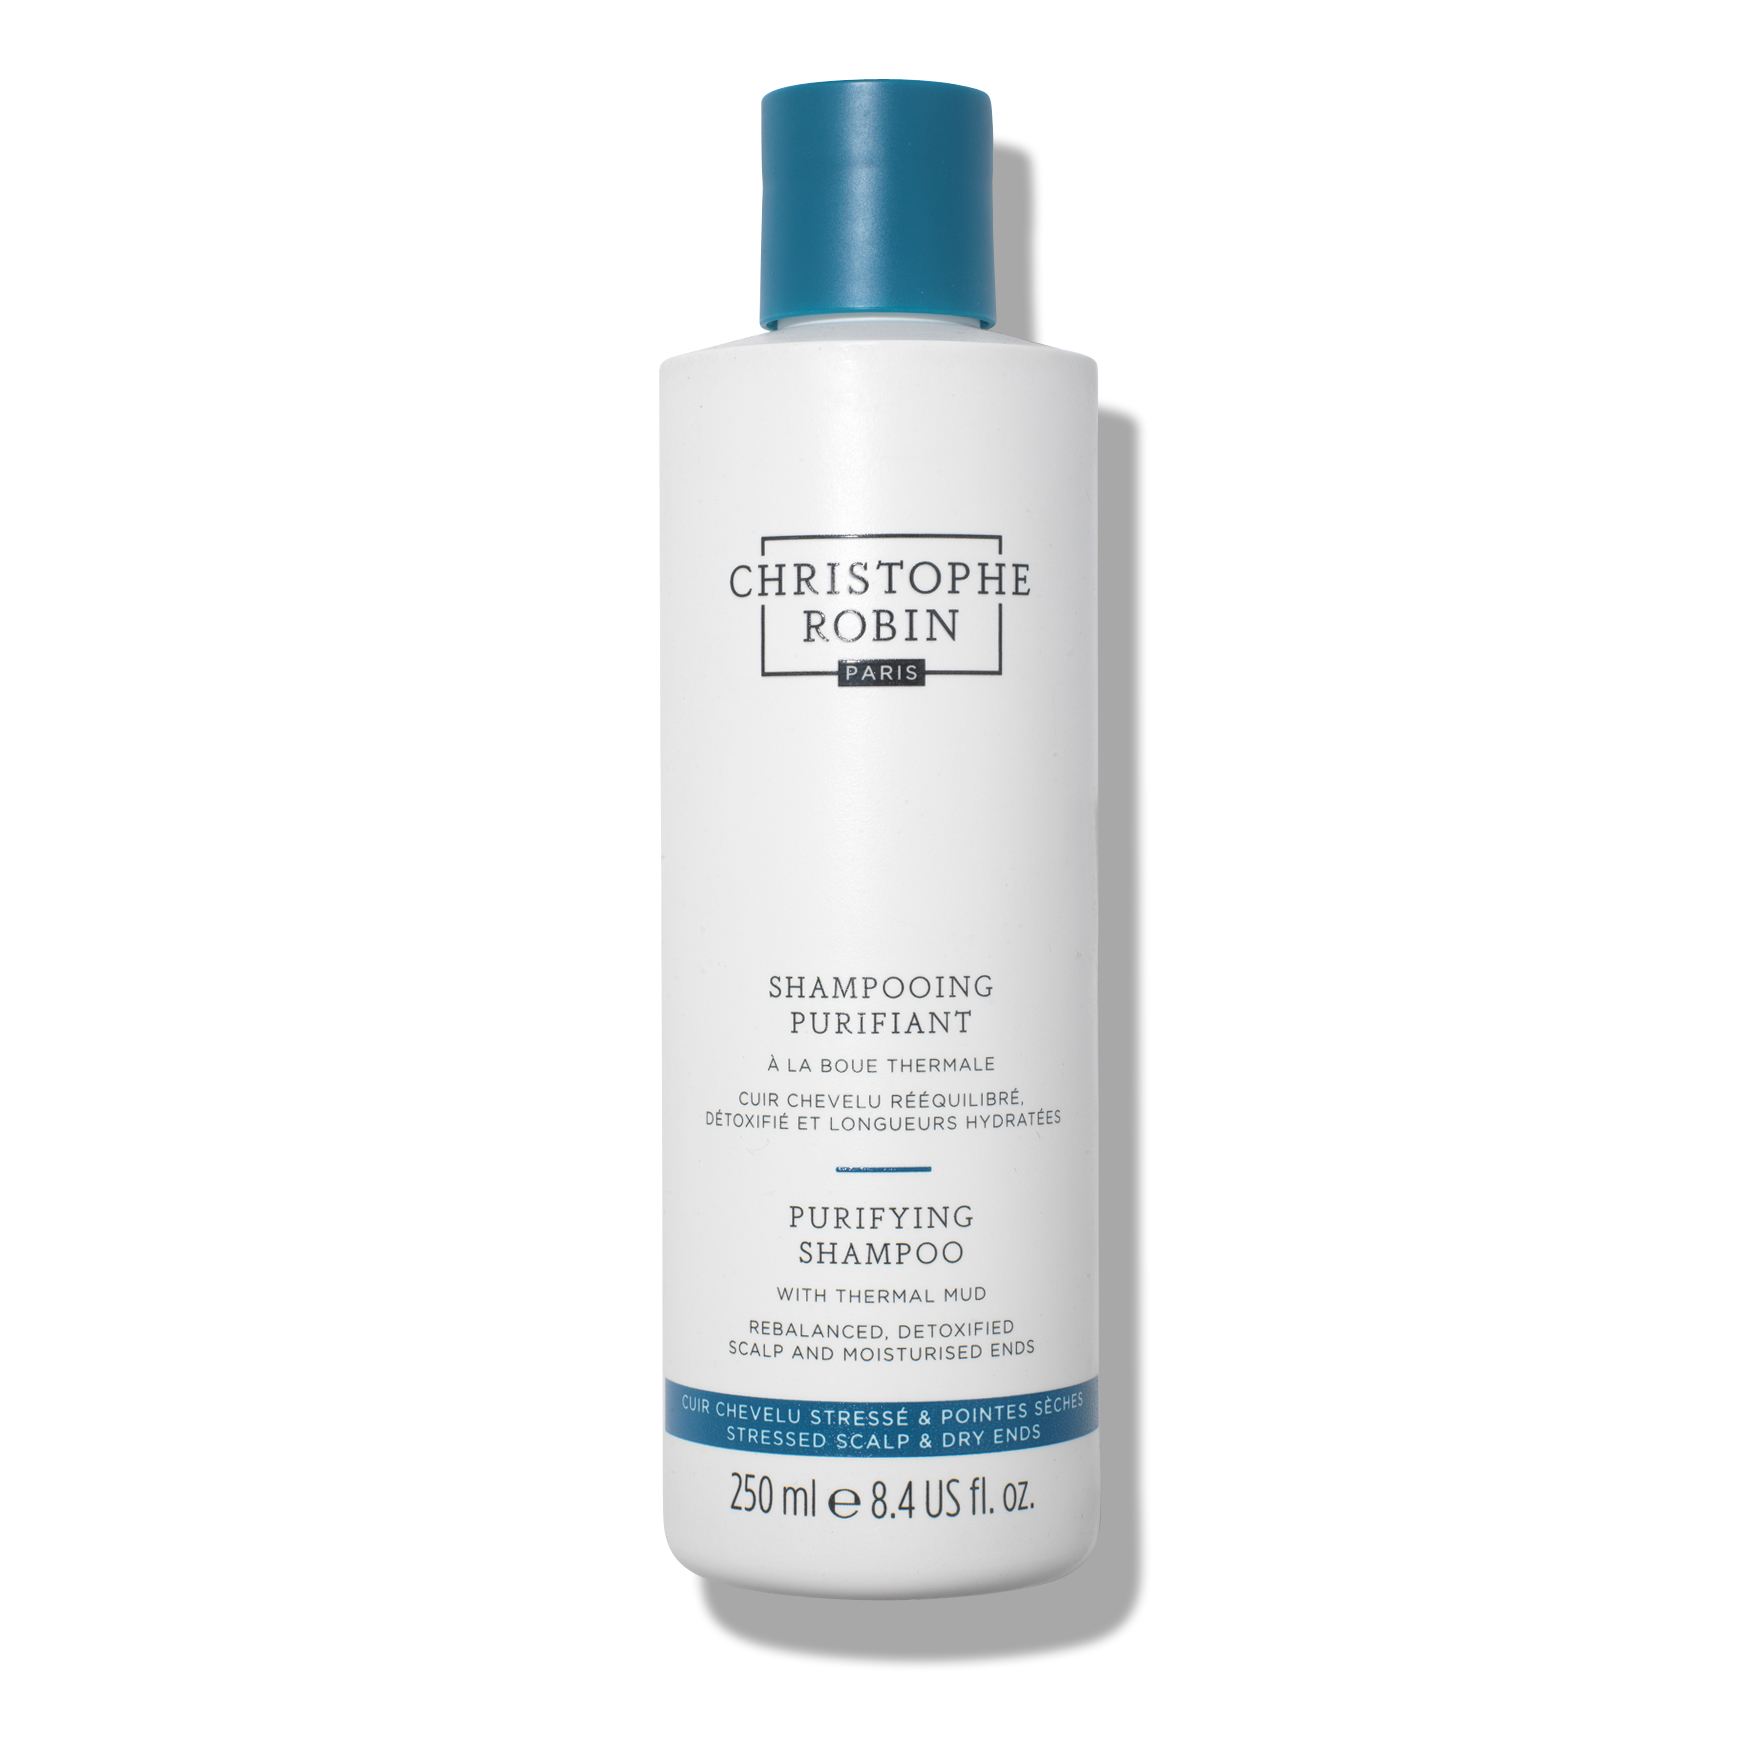 Christophe Robin Purifying Shampoo With Thermal Mud | Space NK